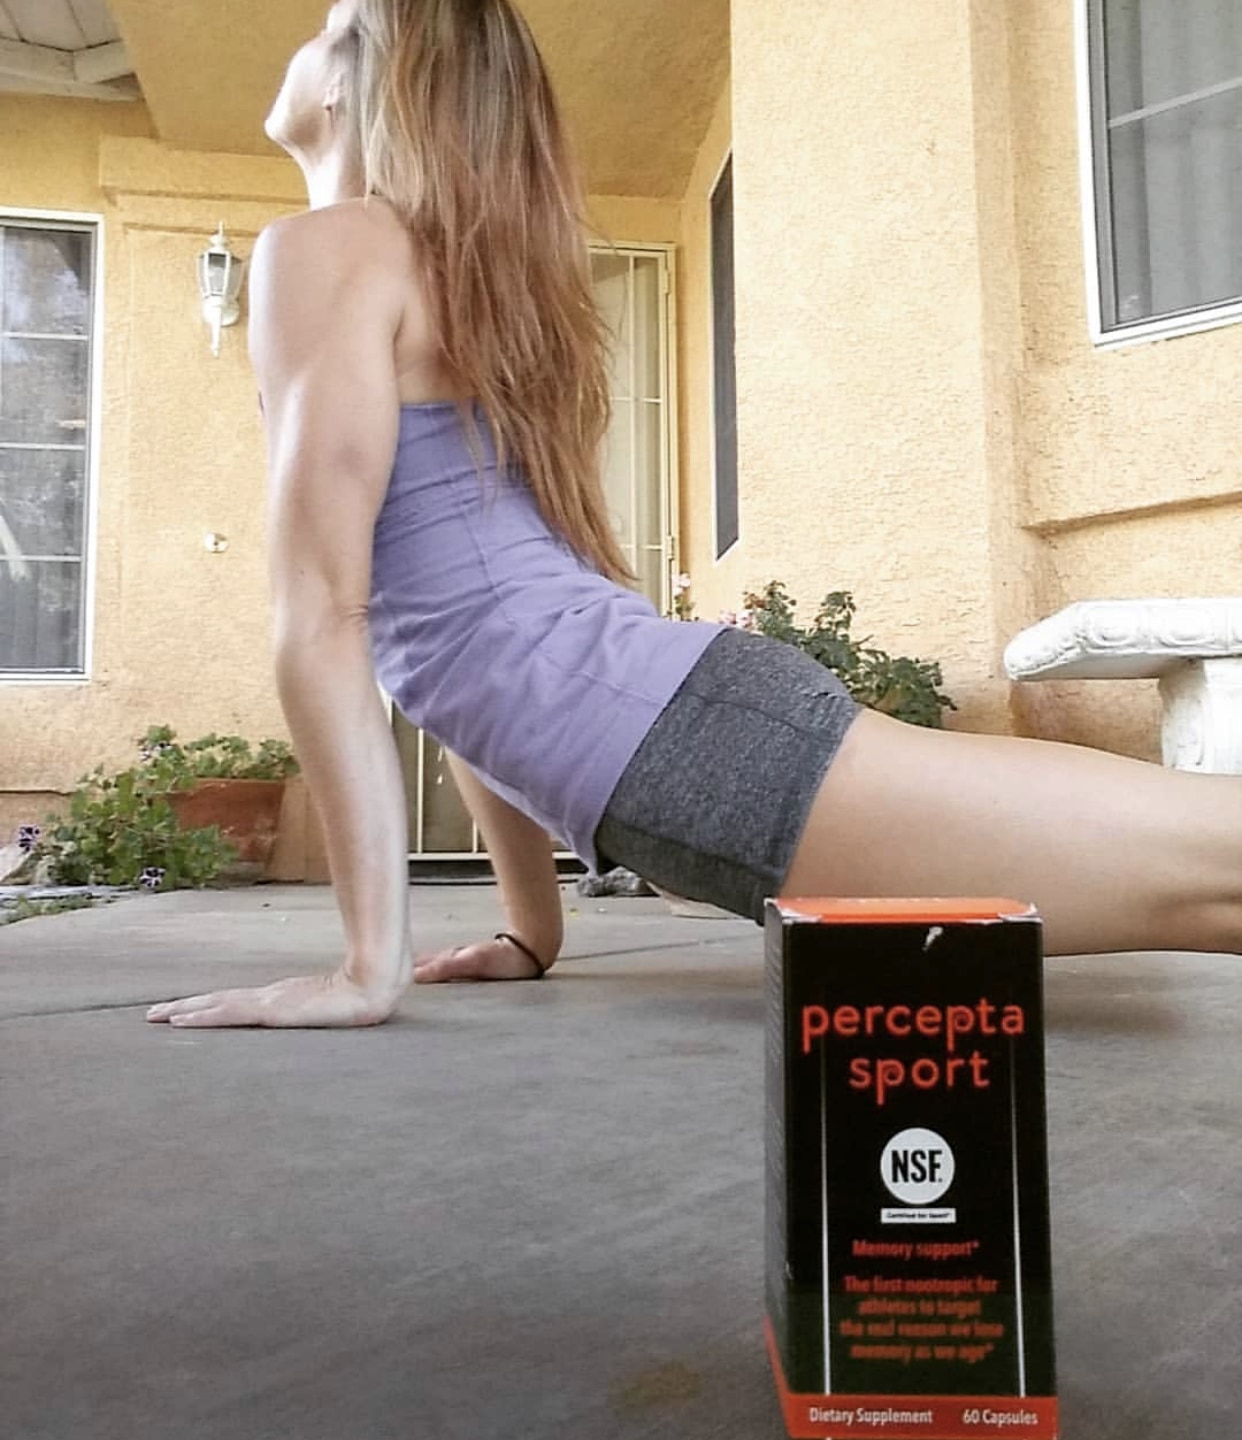 Woman performing yoga pose with a box of percepta sport in the foreground